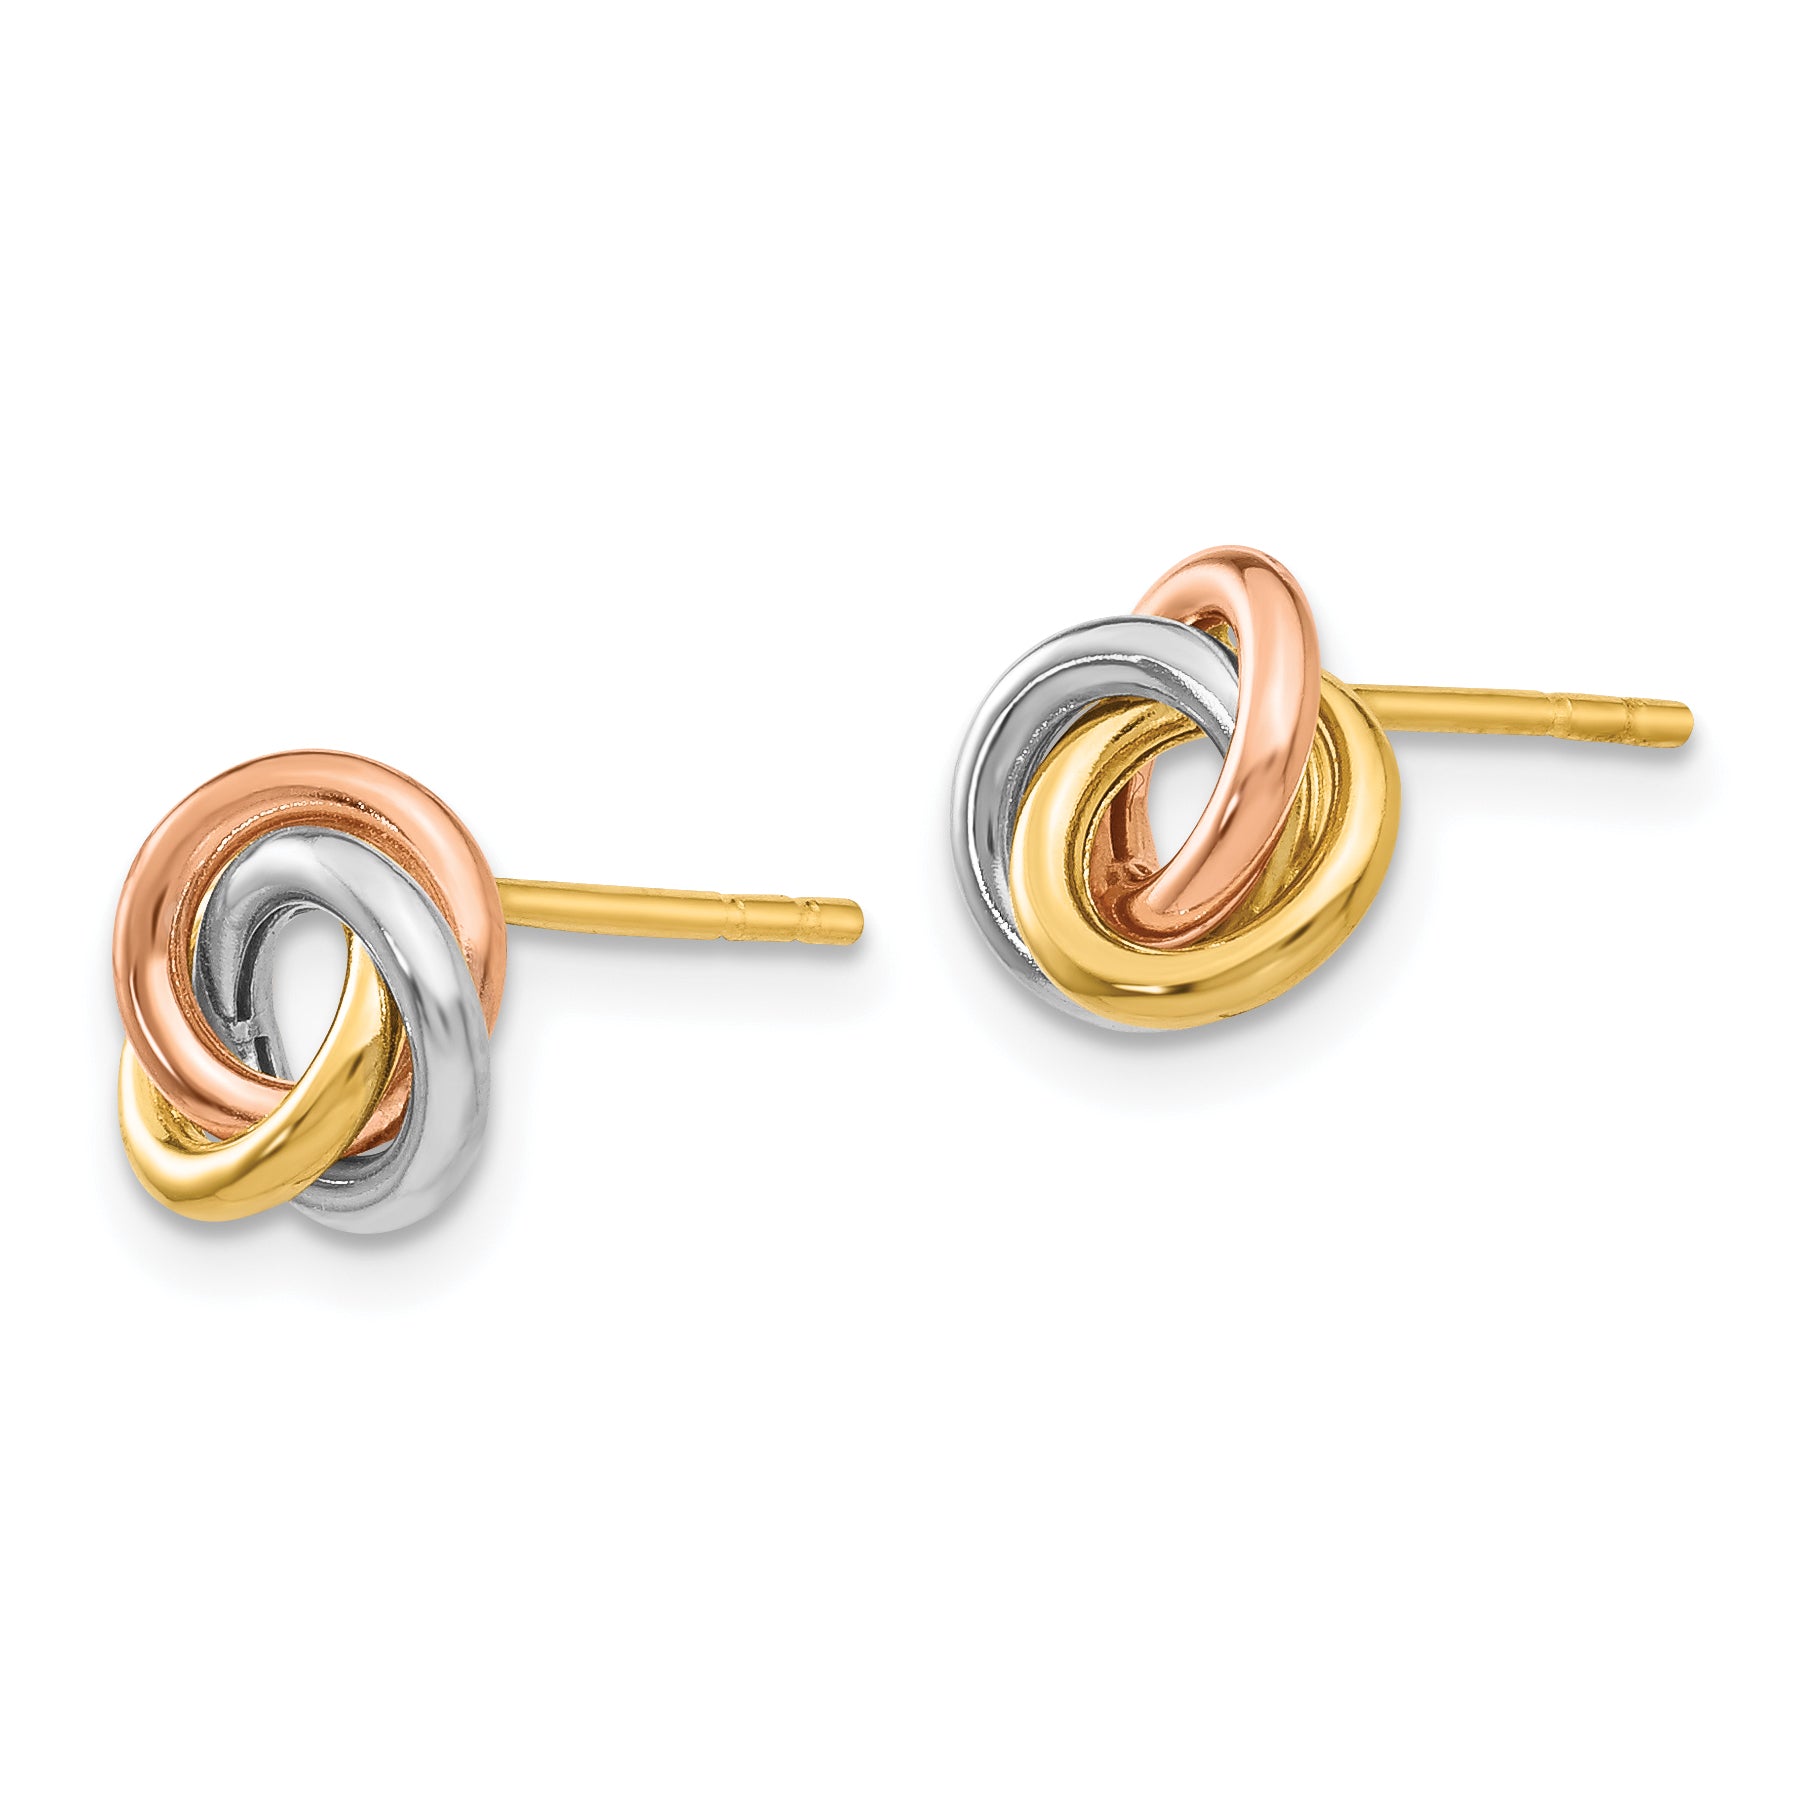 10k Tri-color Twisted Knot Post Earrings